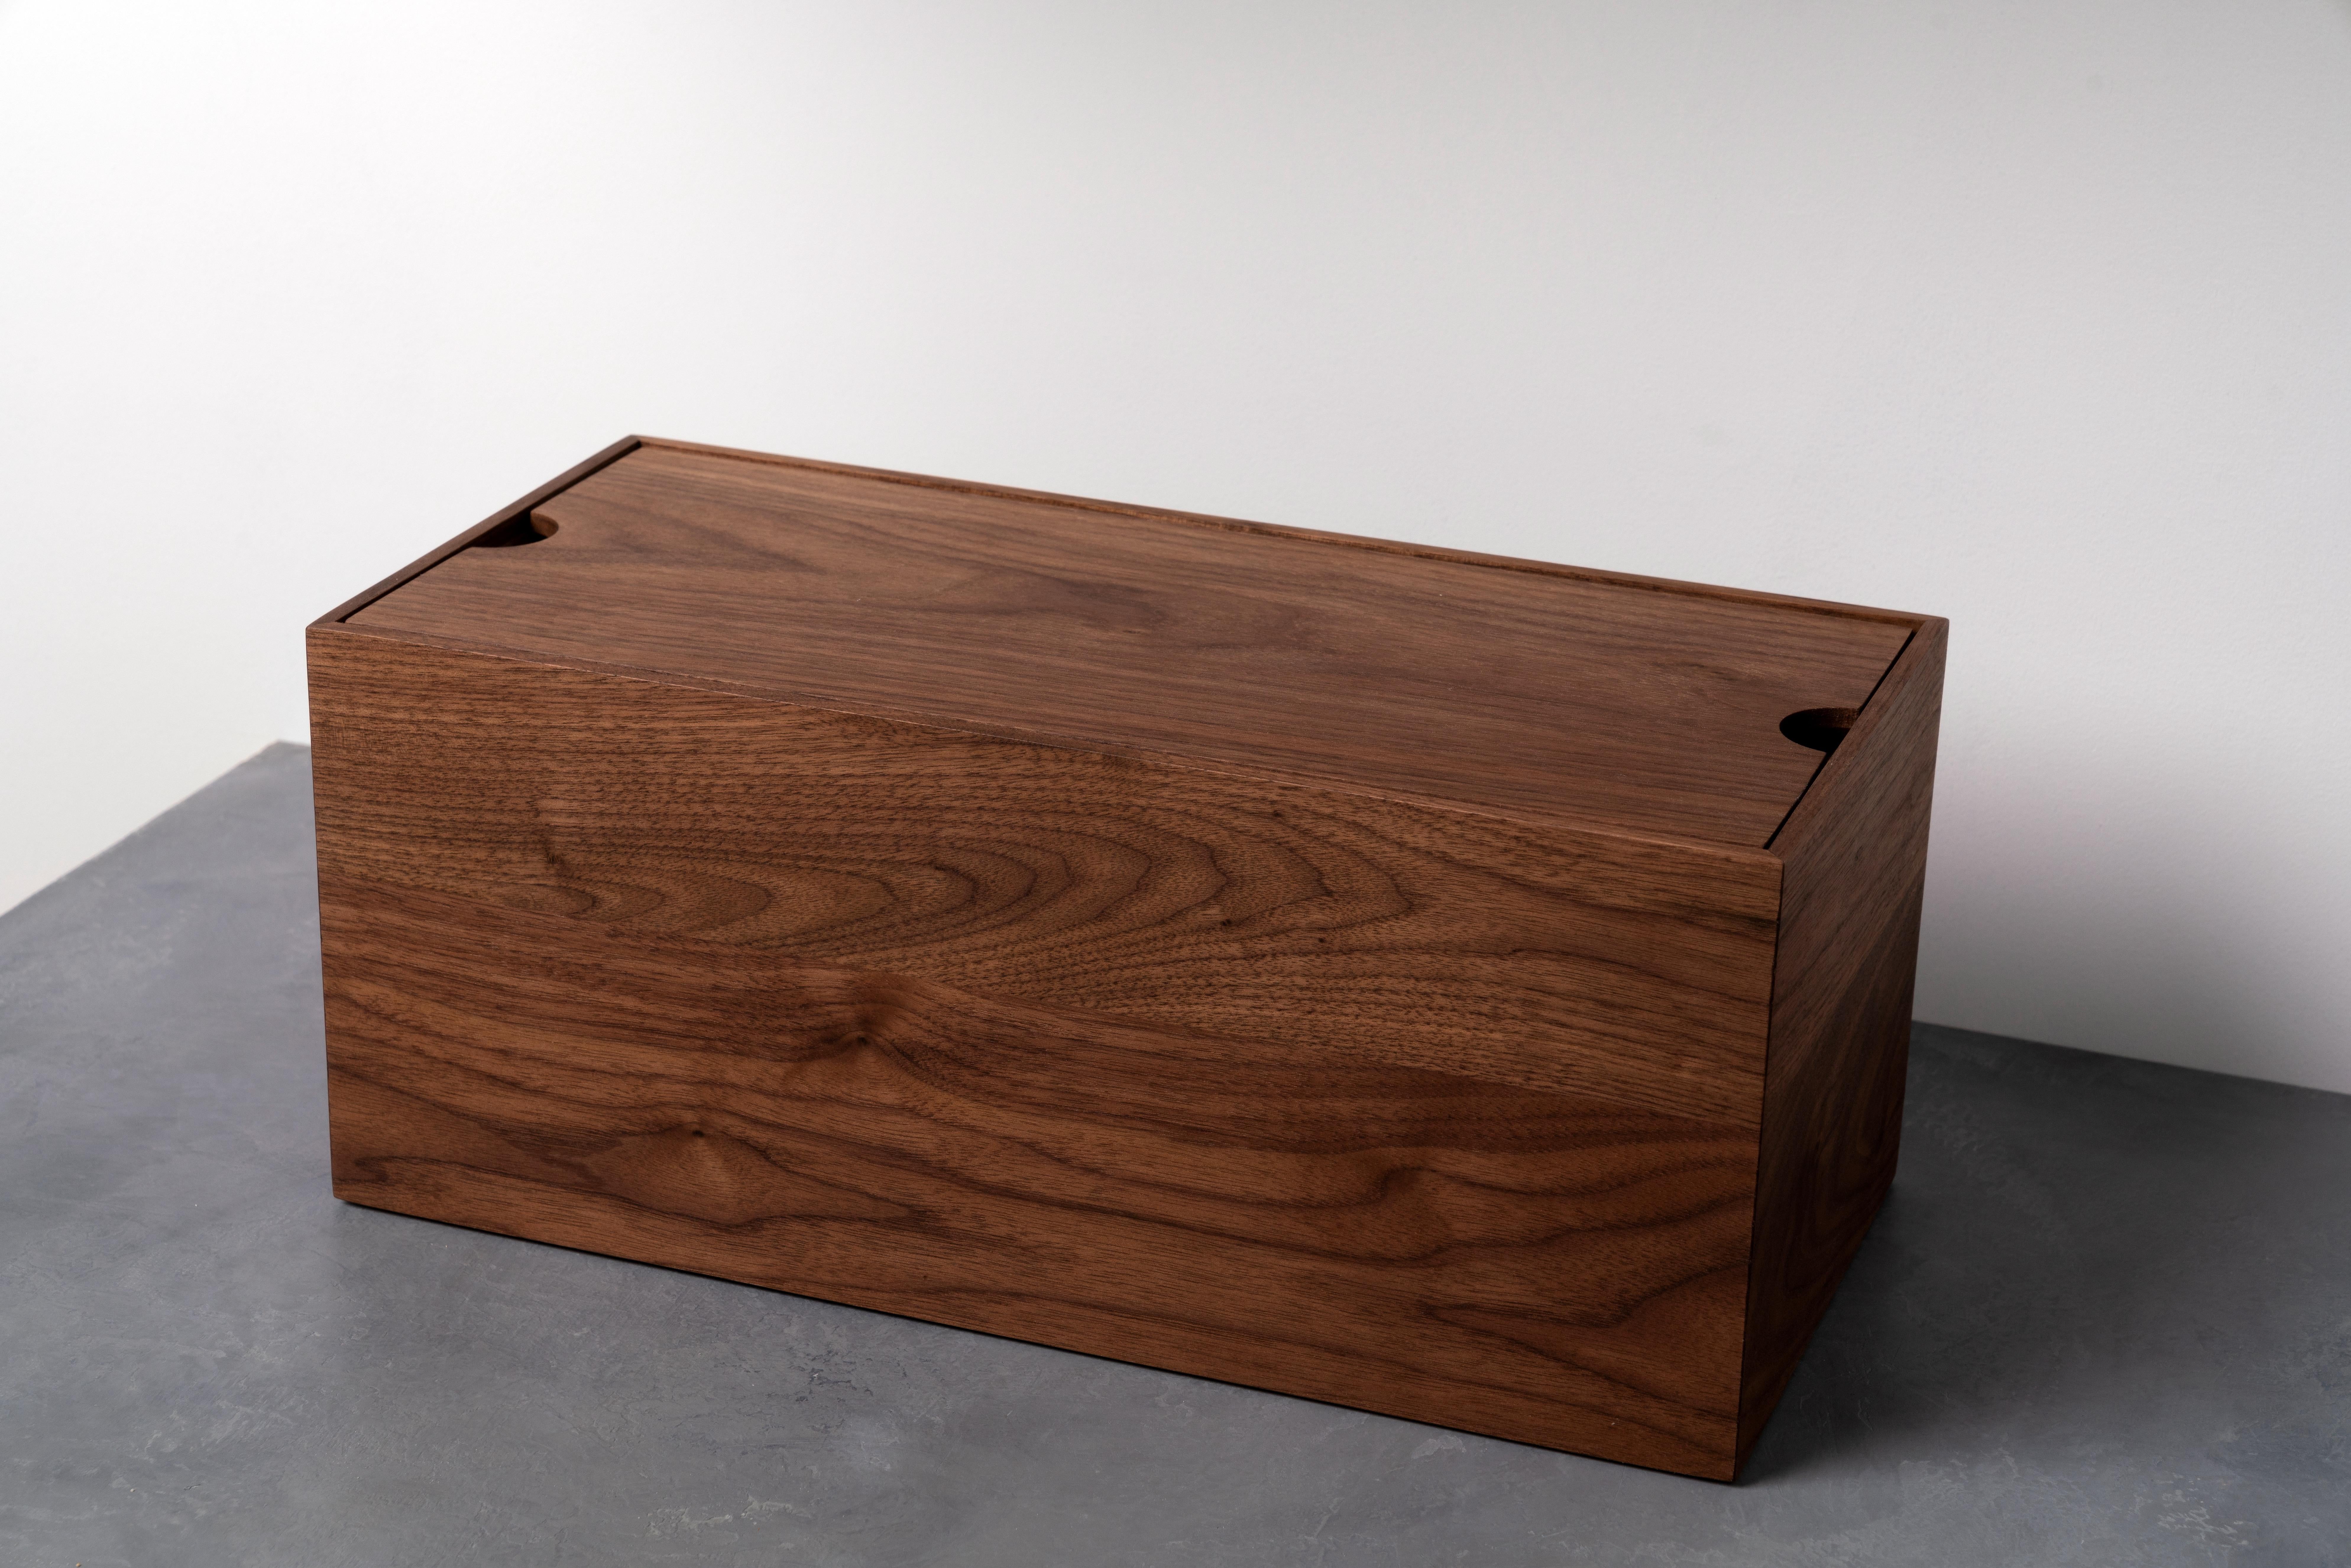 This handcrafted Modern Walnut Wood Bread Box will add a warm touch to your kitchen while keeping your bread fresher for longer. The flush lid doubles as a cutting board and features finger holes on either end for easy opening and airflow to keep